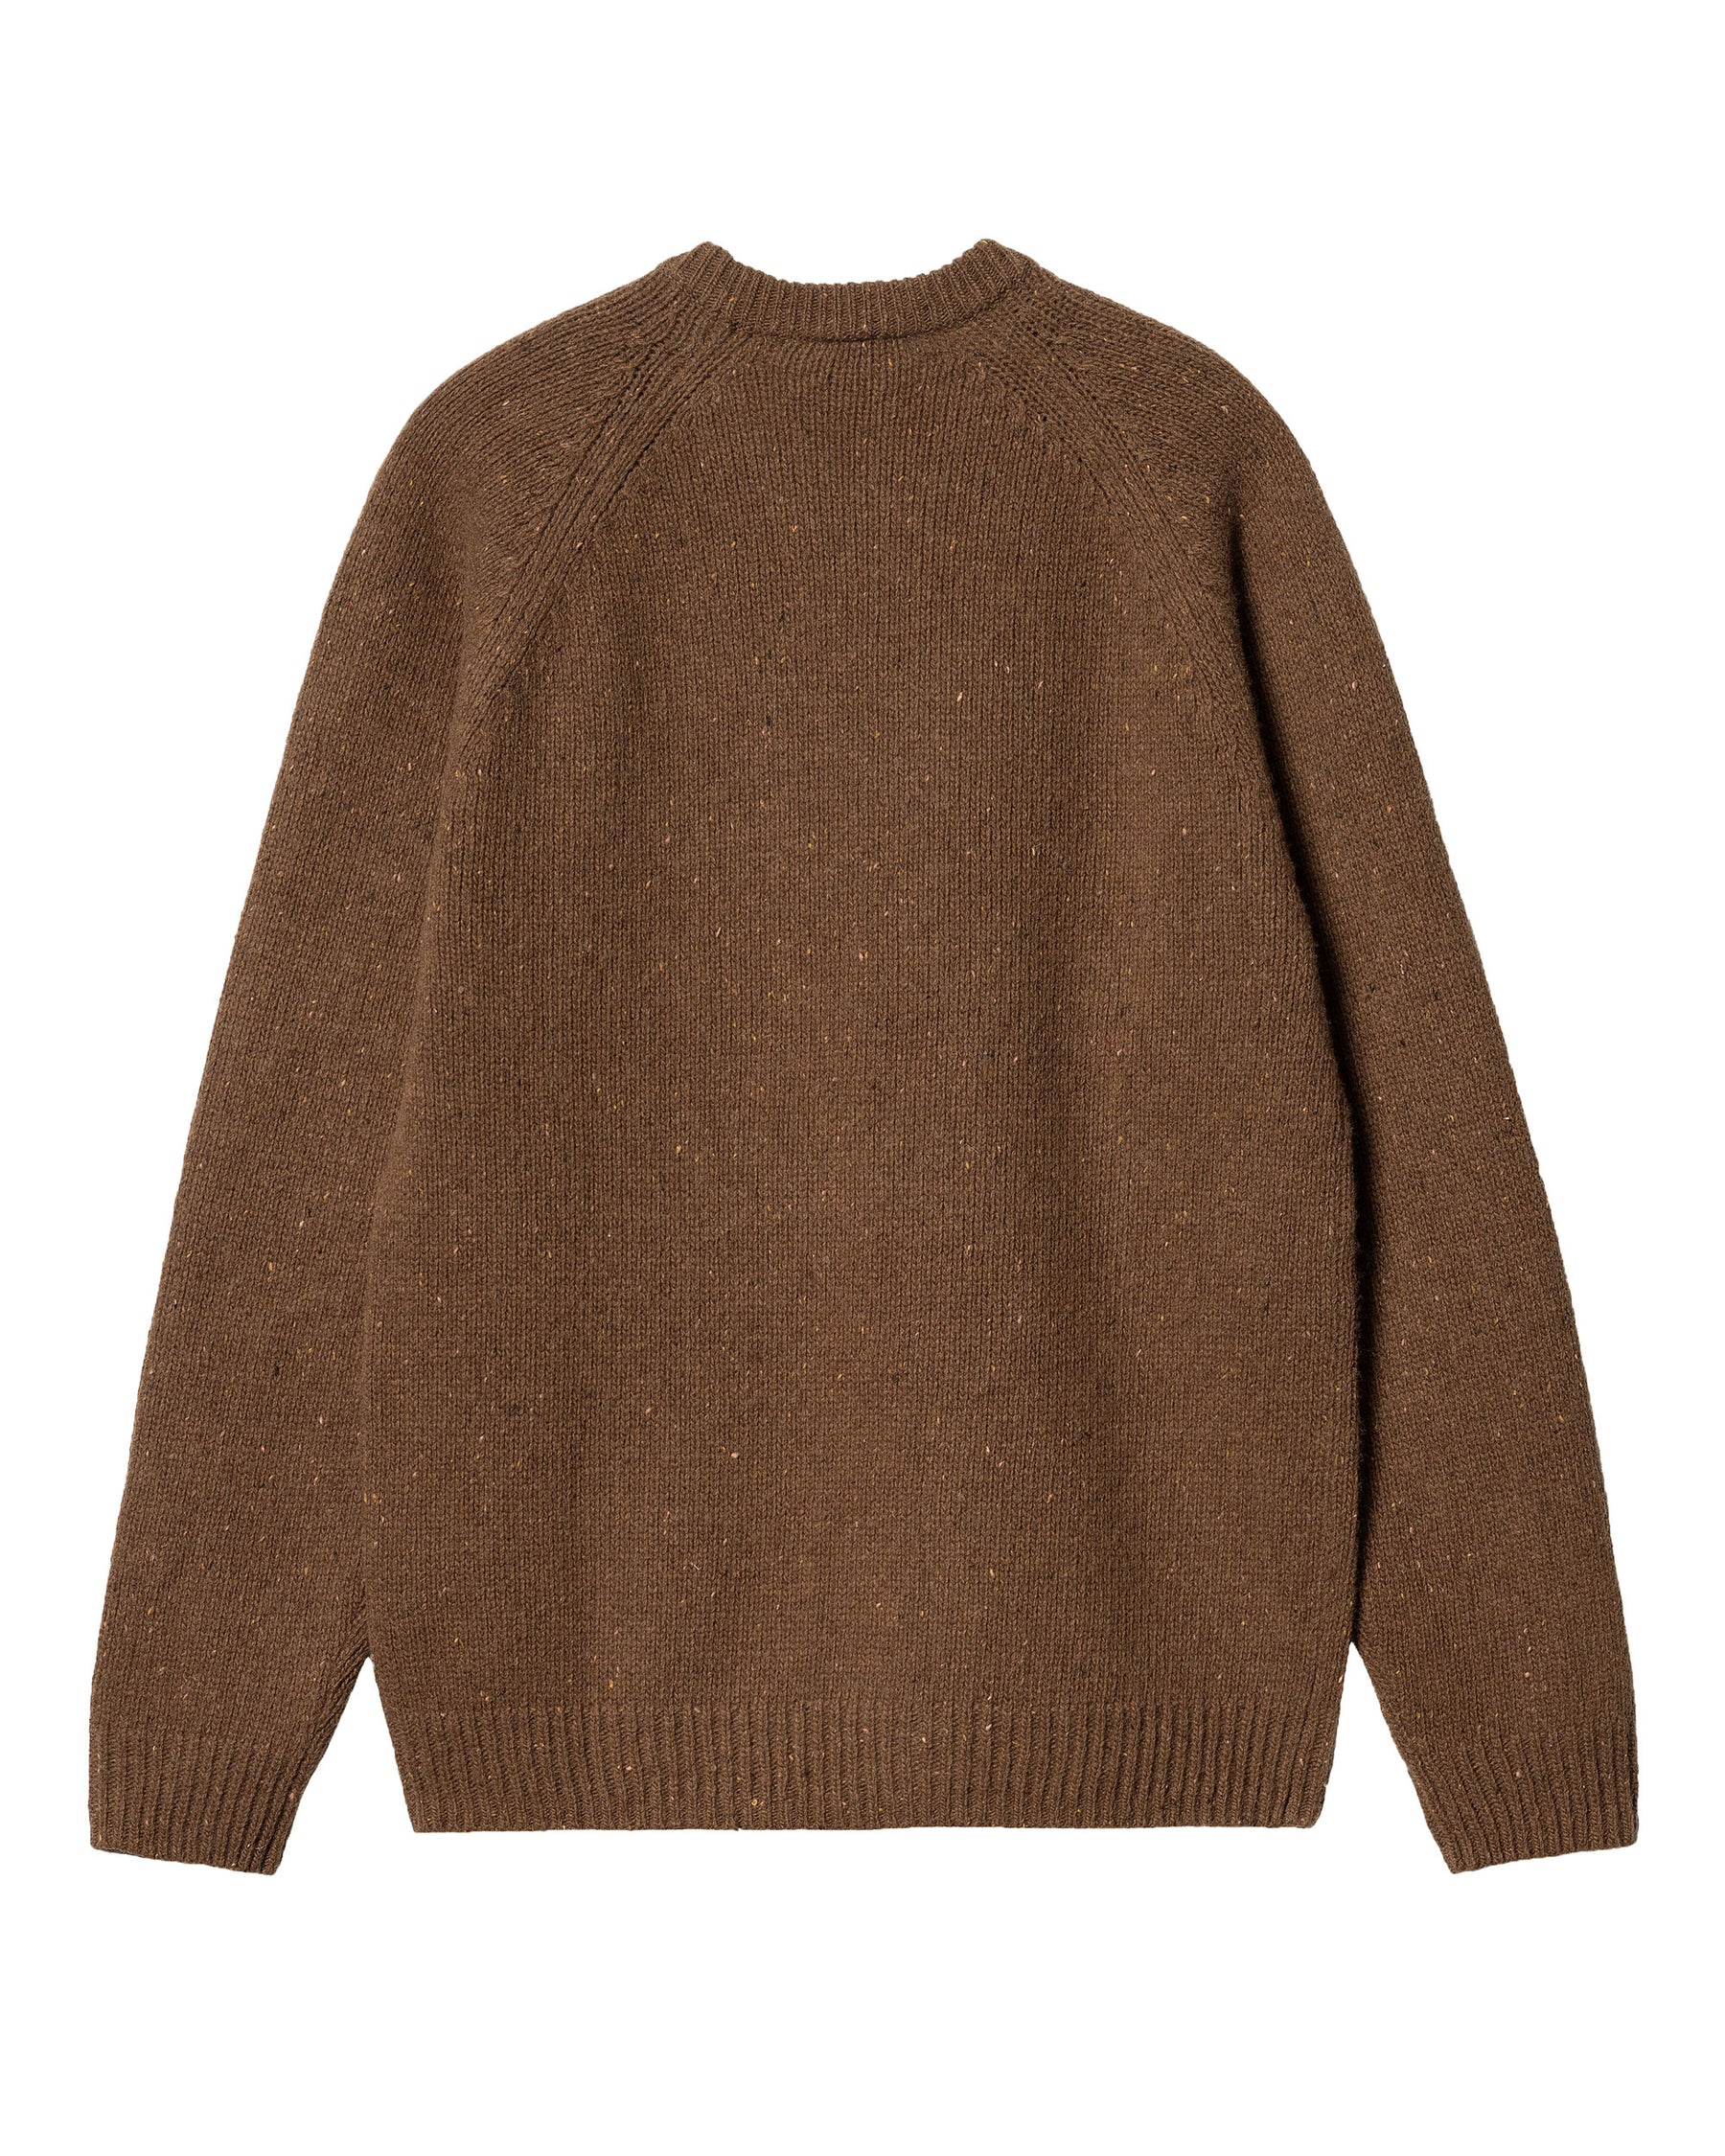 Carhartt Wip Anglistic Sweater Speckled Tamarind